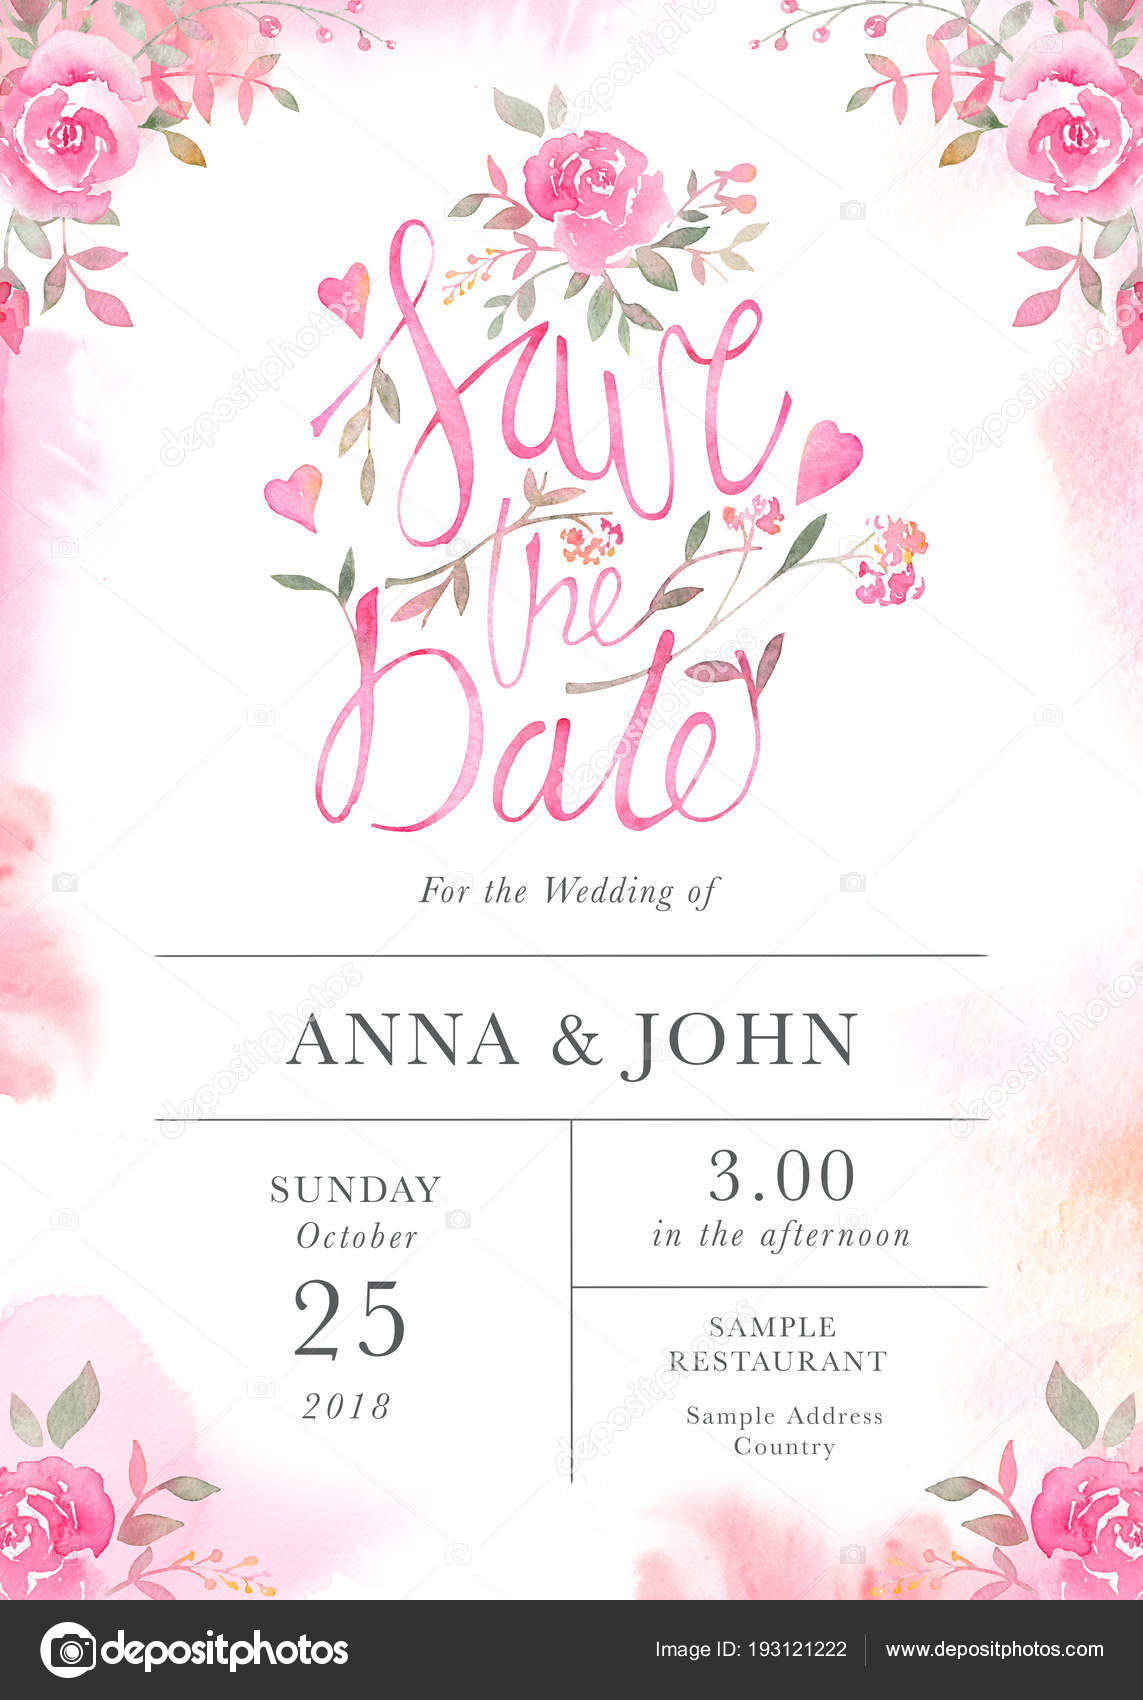 Wedding invitation card template with watercolor rose flowers With Regard To Sample Wedding Invitation Cards Templates